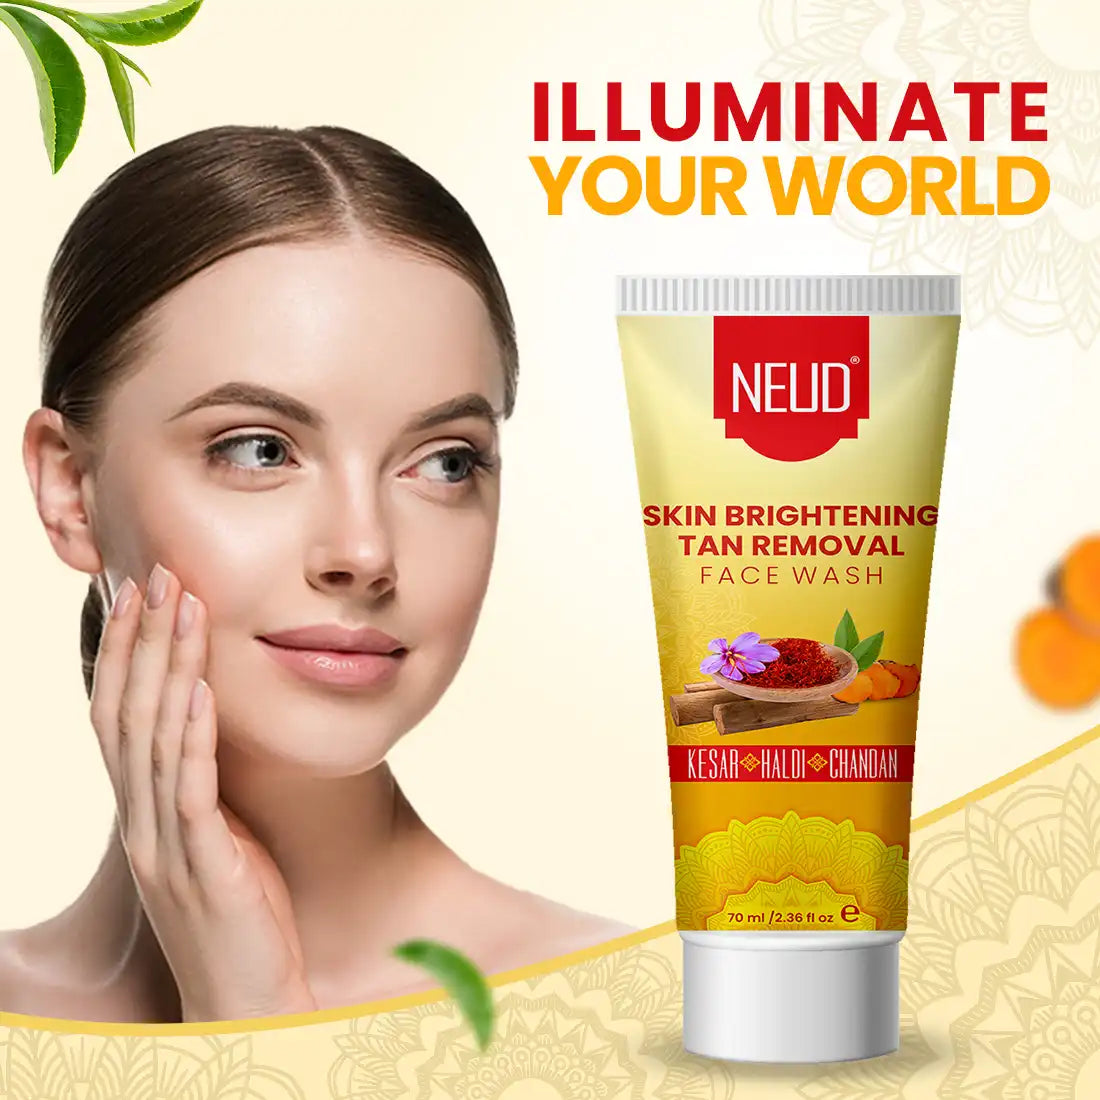 NEUD Skin Brightening Tan Removal Face Wash for Men and Women - 70ml